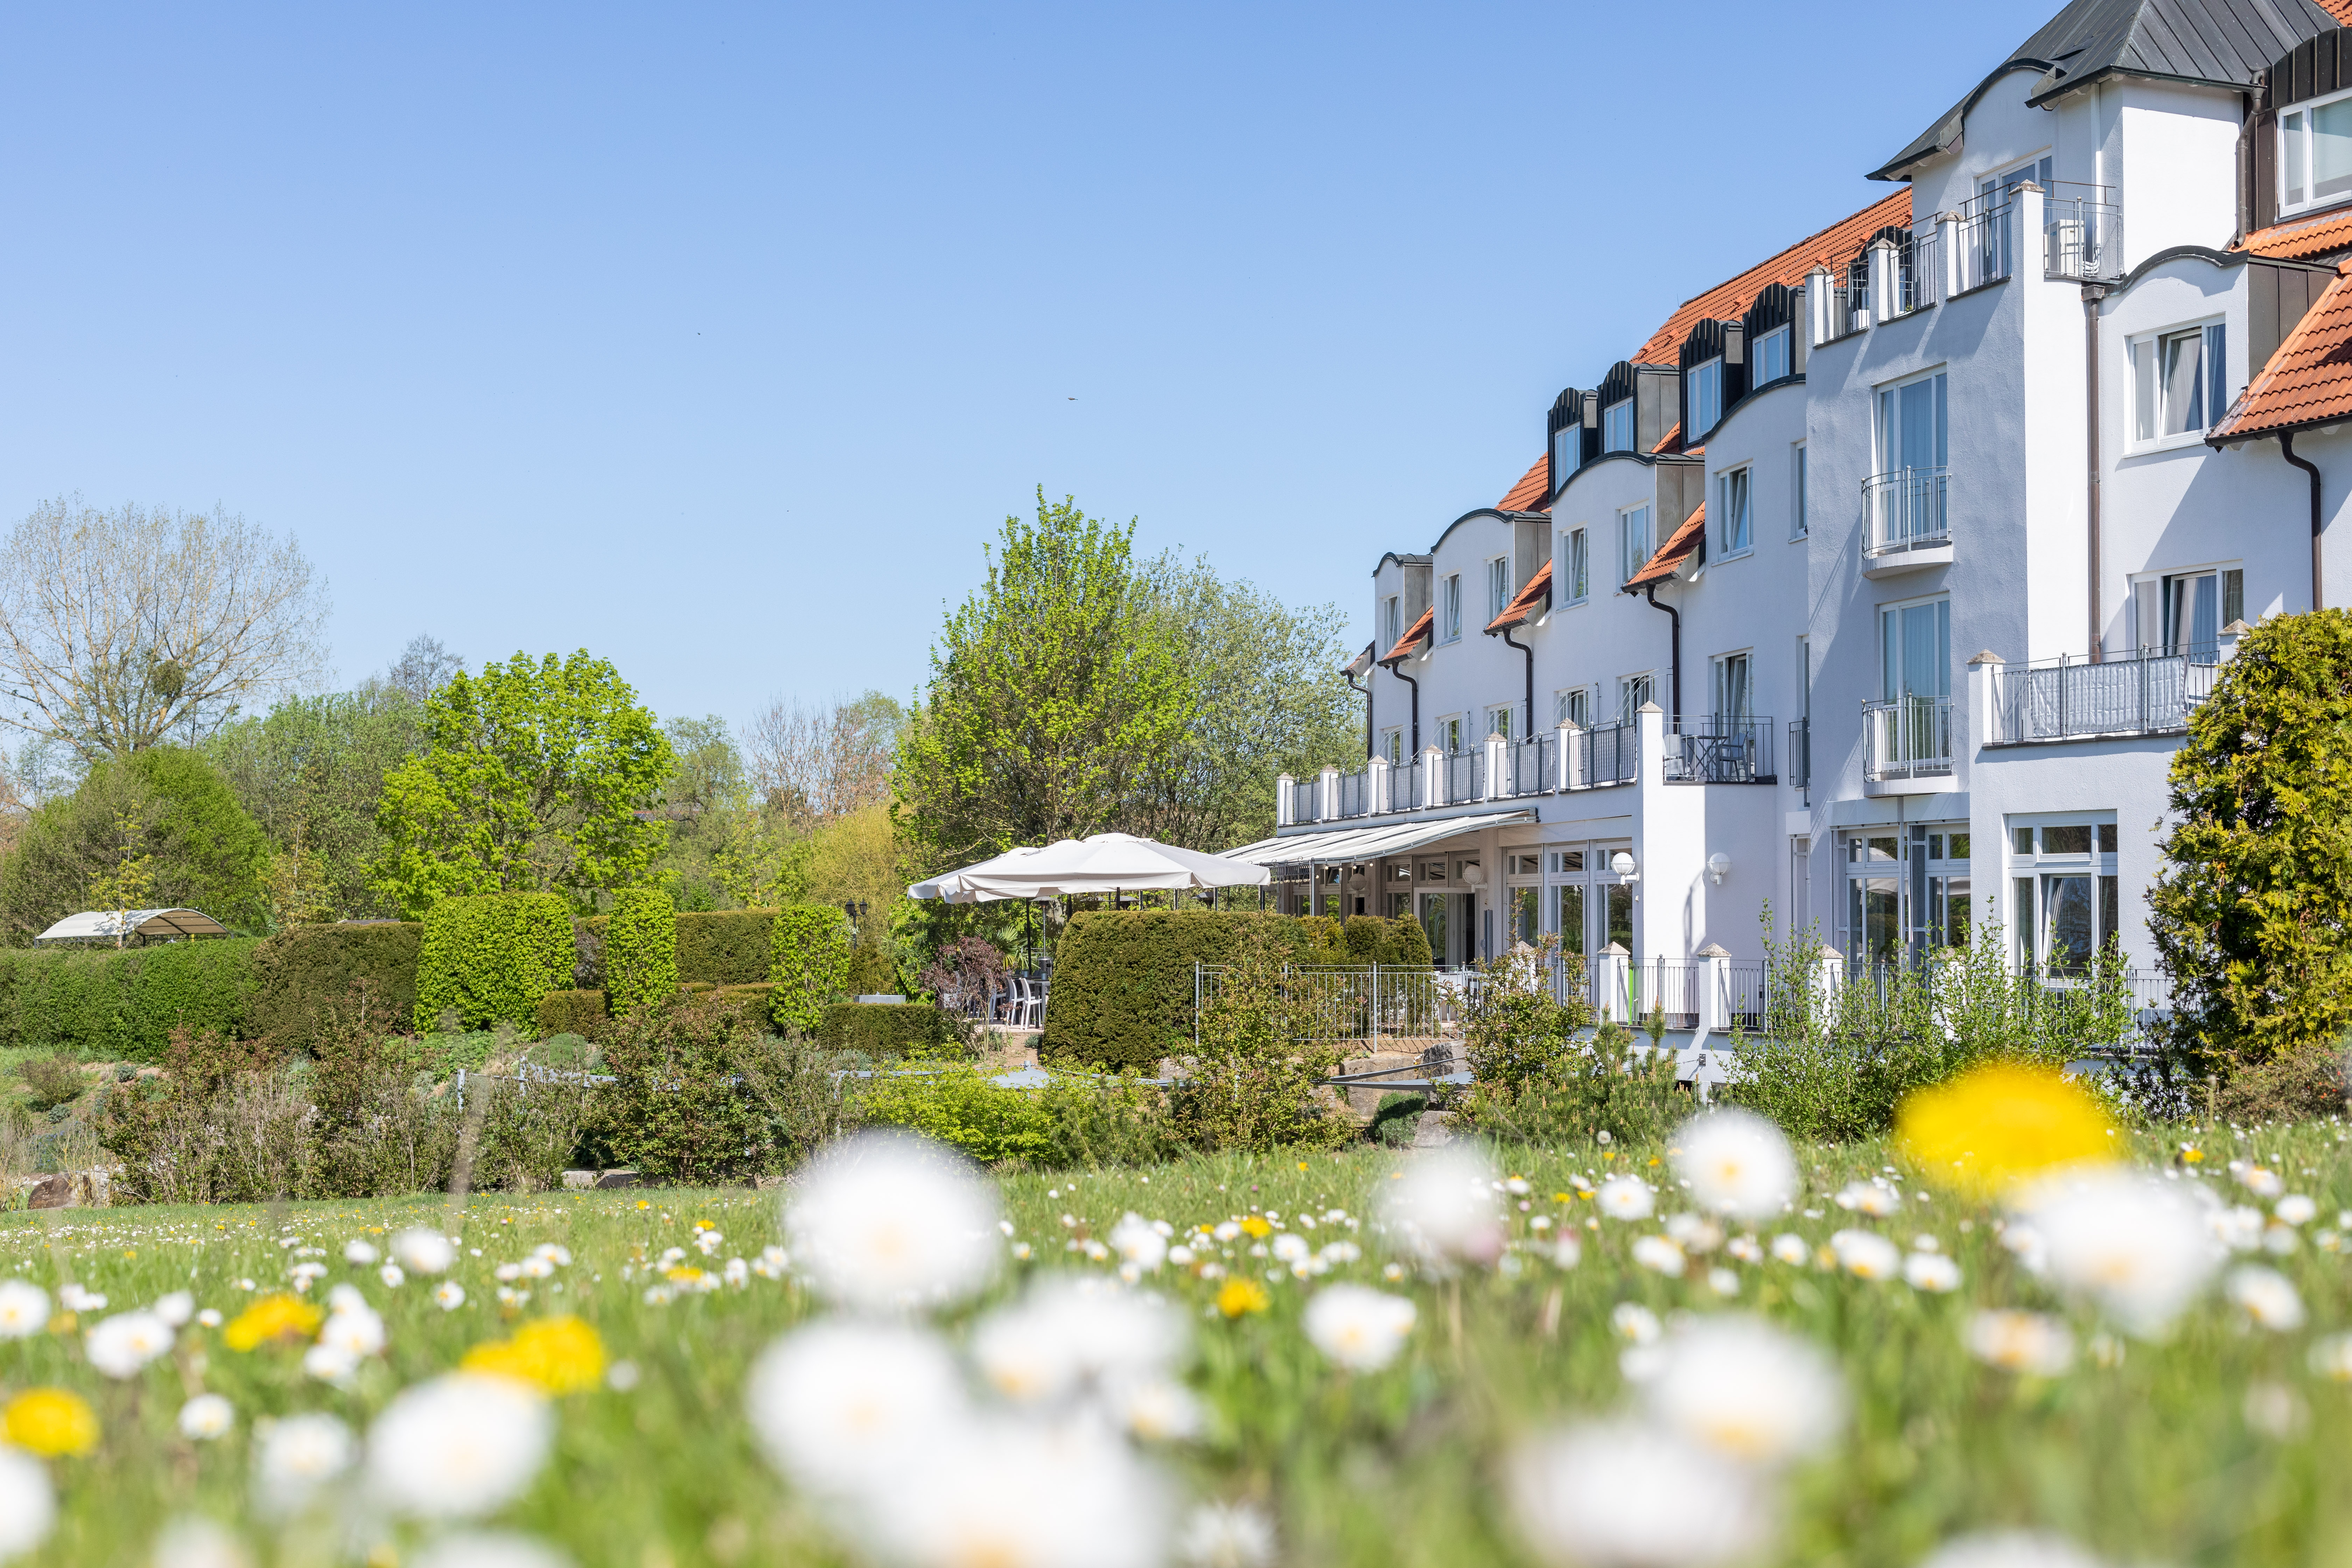 Landhotel Rügheim <br/>115.00 ew <br/> <a href='http://vakantieoplossing.nl/outpage/?id=adf9368bc5f7e6d682dc55f722be5e84' target='_blank'>View Details</a>